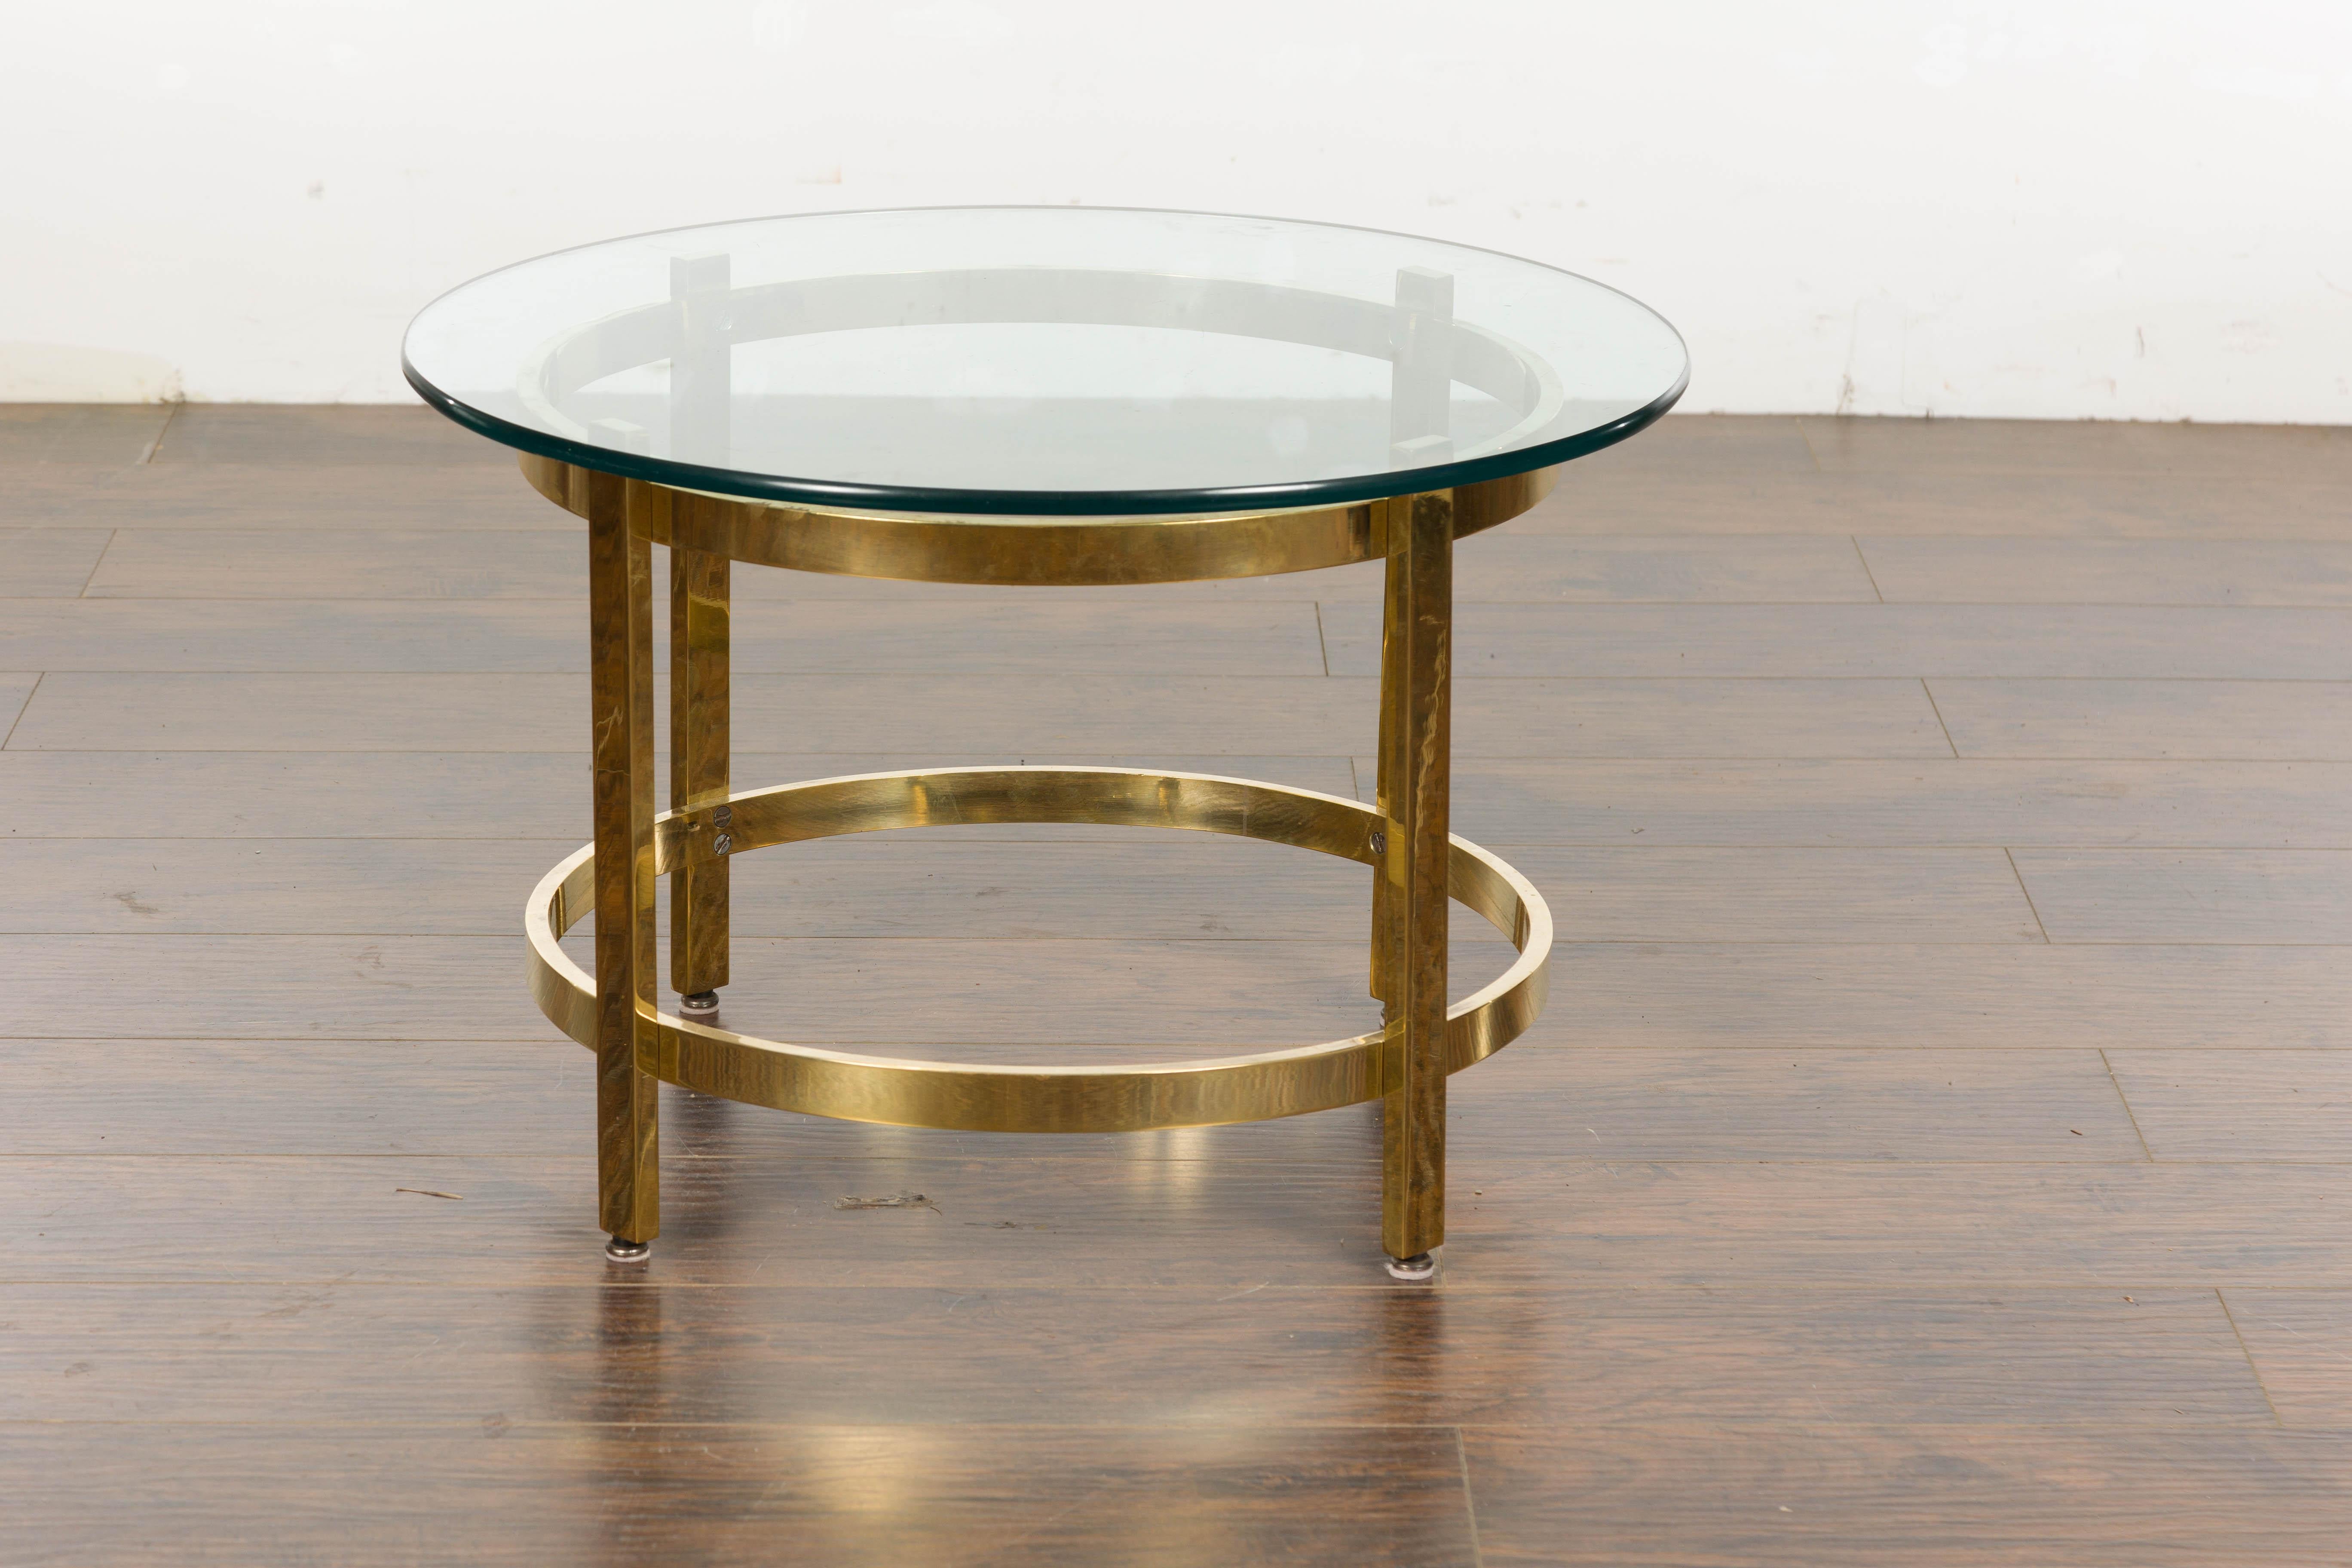 1950s Midcentury Italian Brass Side Table with Round Glass Top For Sale 3